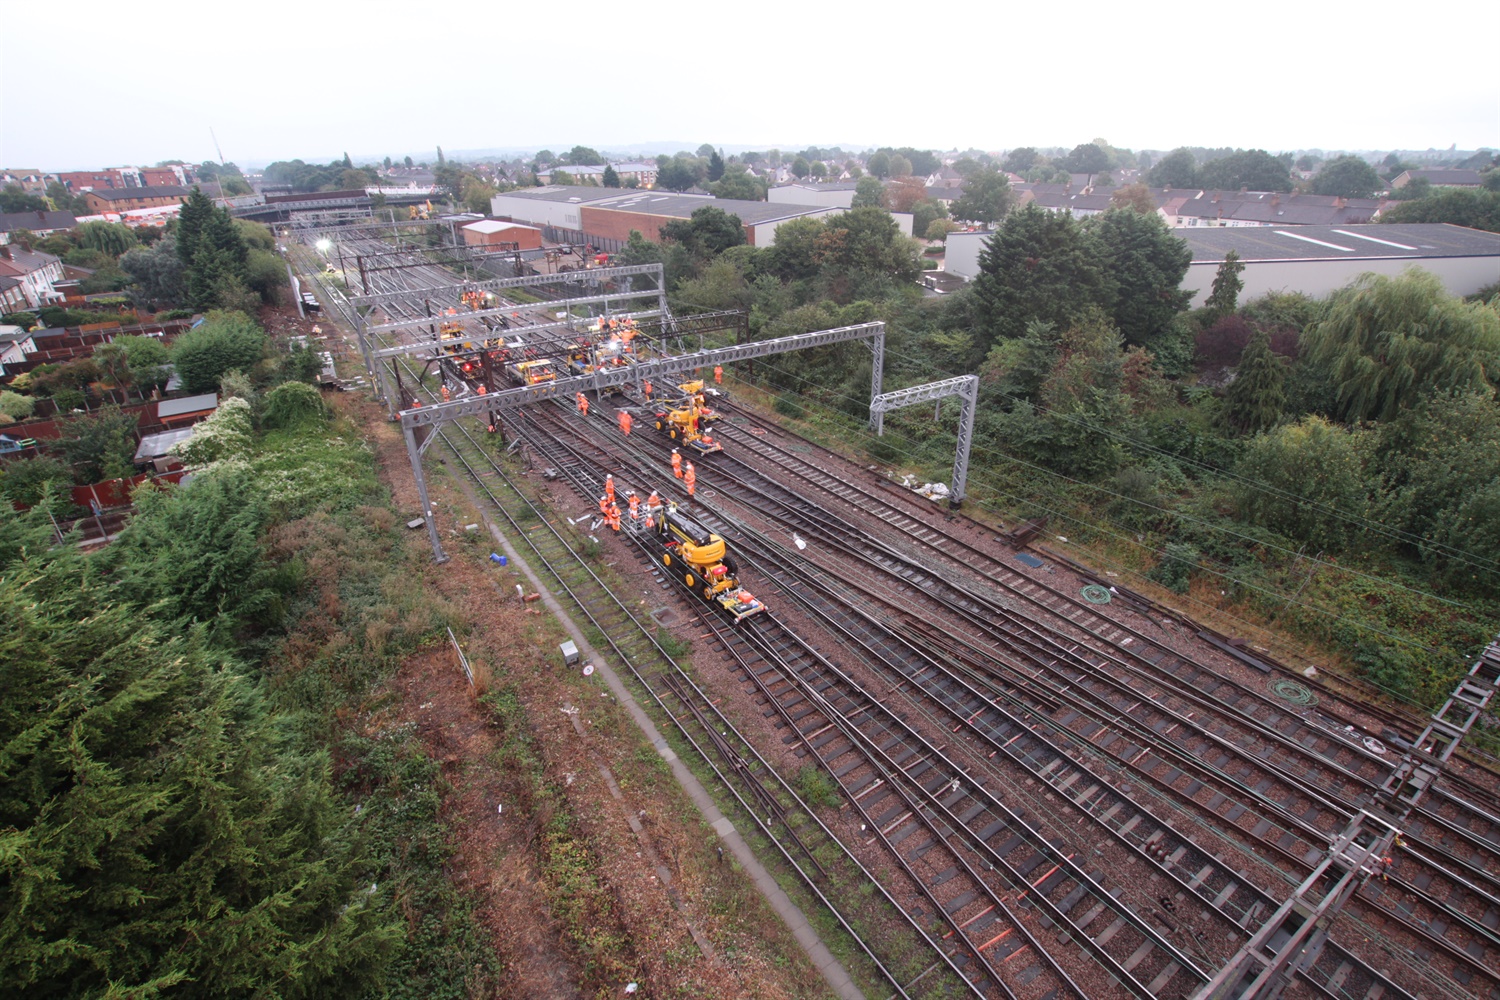 Shenfield braced for New Year closures ahead of Crossrail arrival